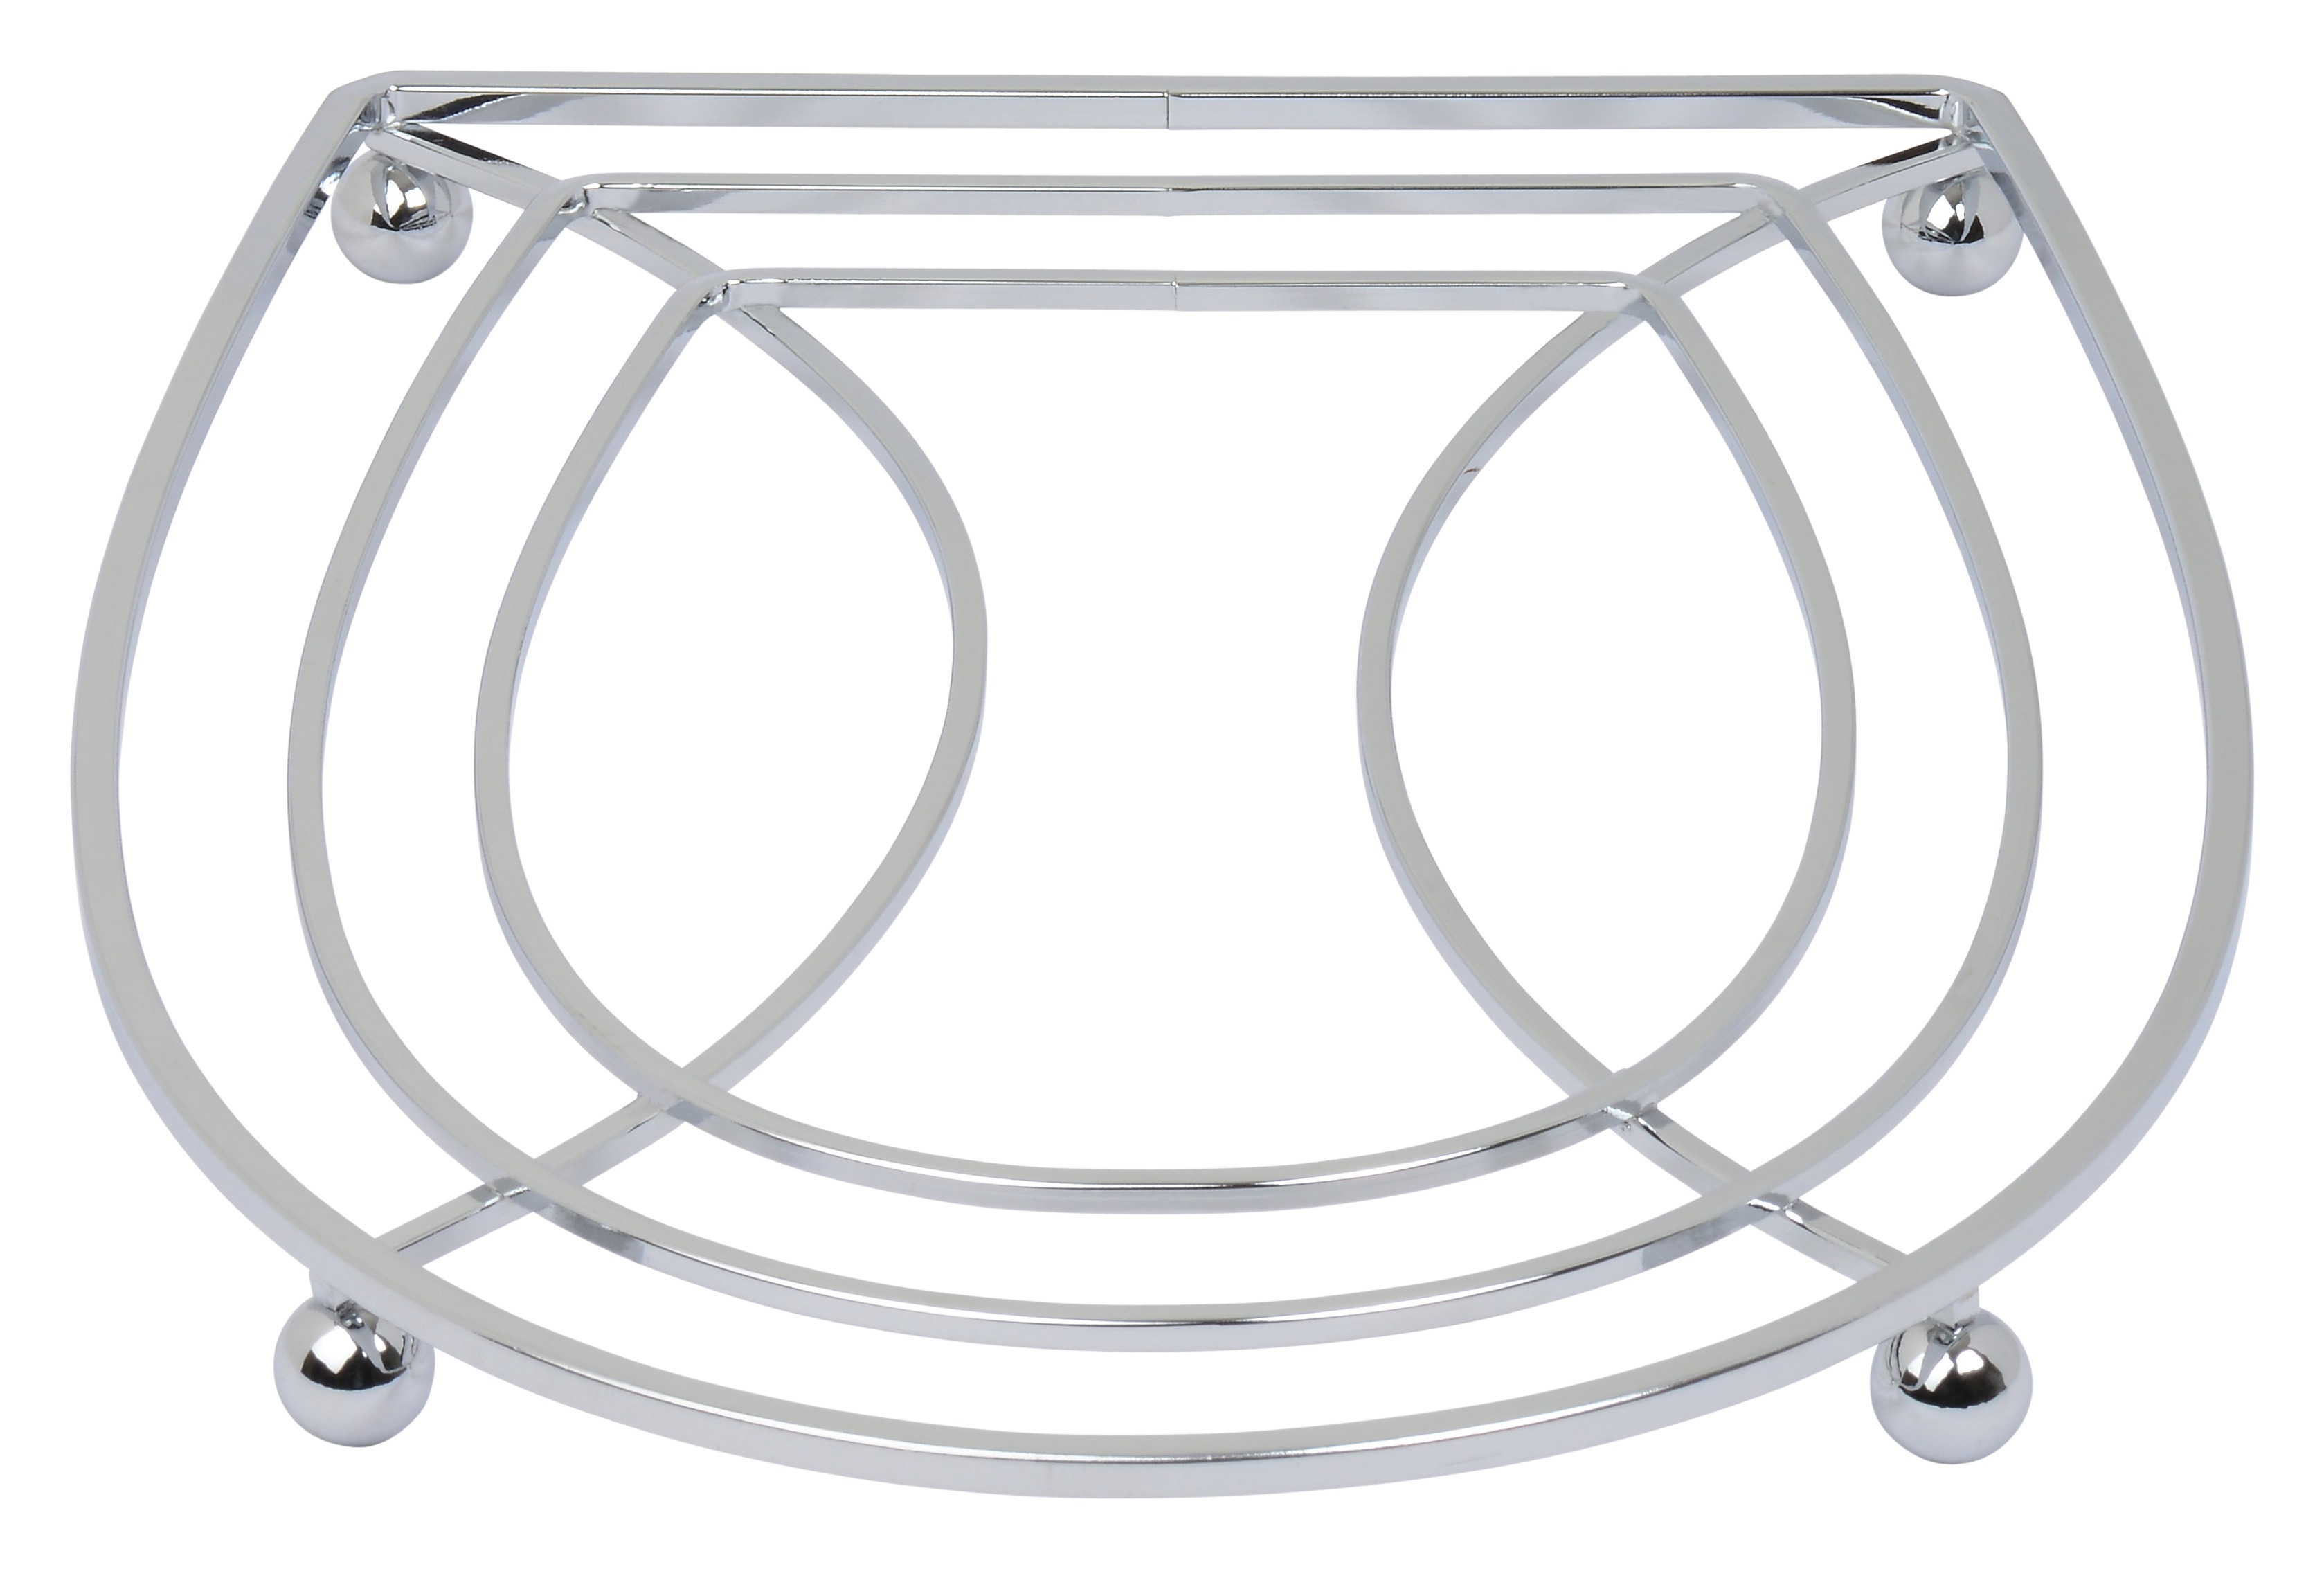 Trivet - High Quality Stainless Steel with Shiny Chrome Polish